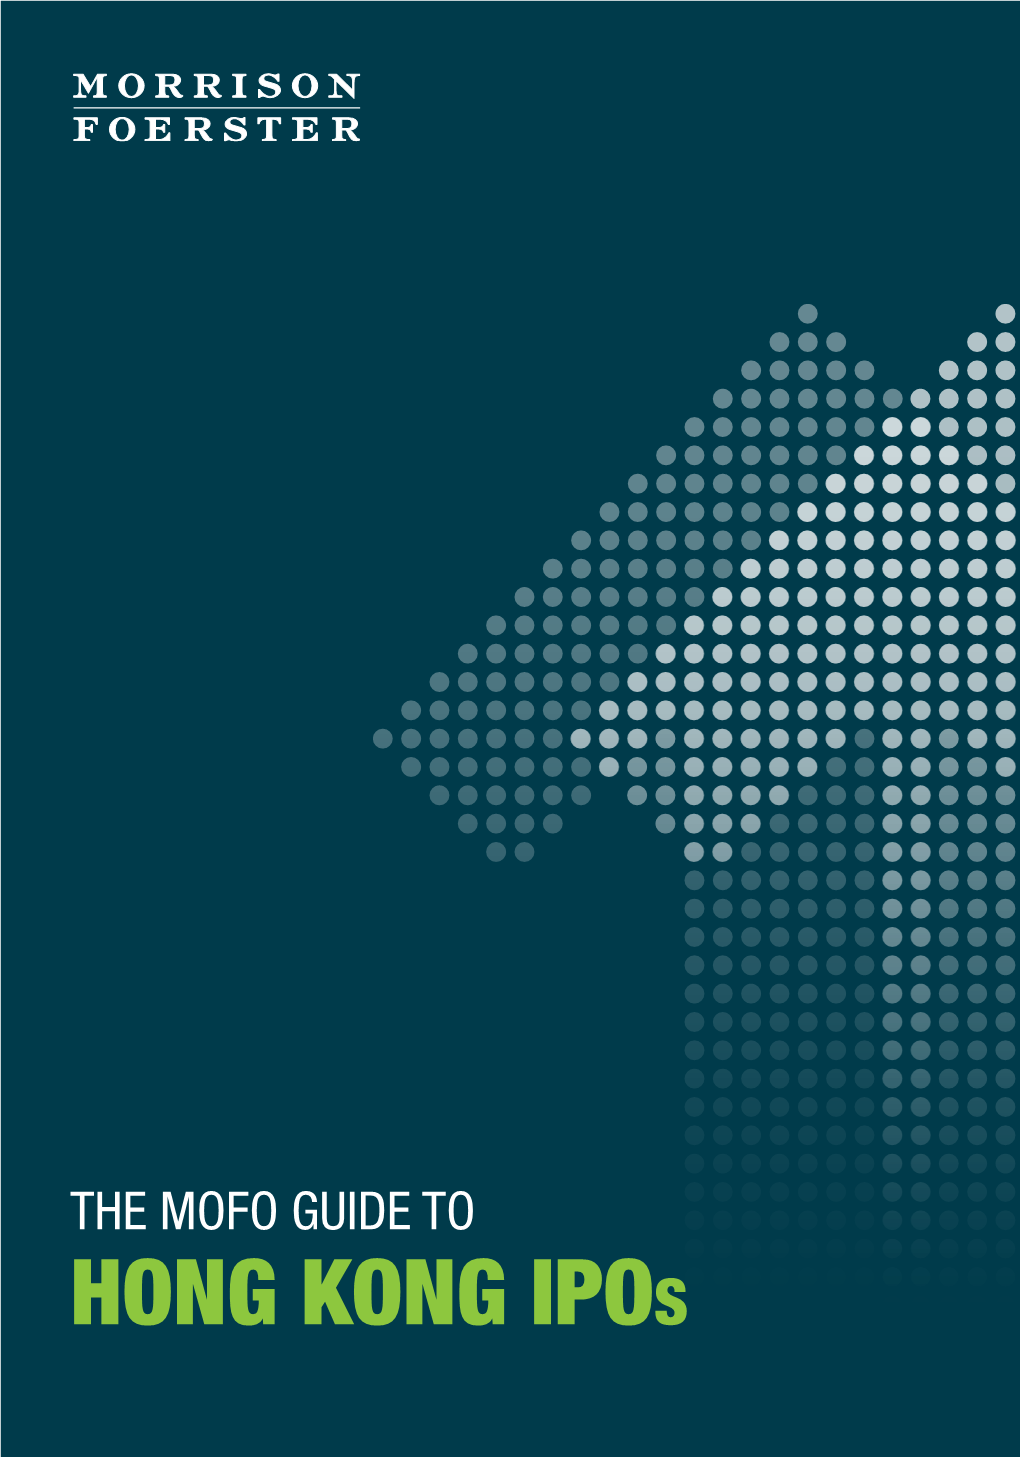 The Mofo Guide to Hong Kong Ipos a COMPLEX SUBJECT MADE SIMPLE